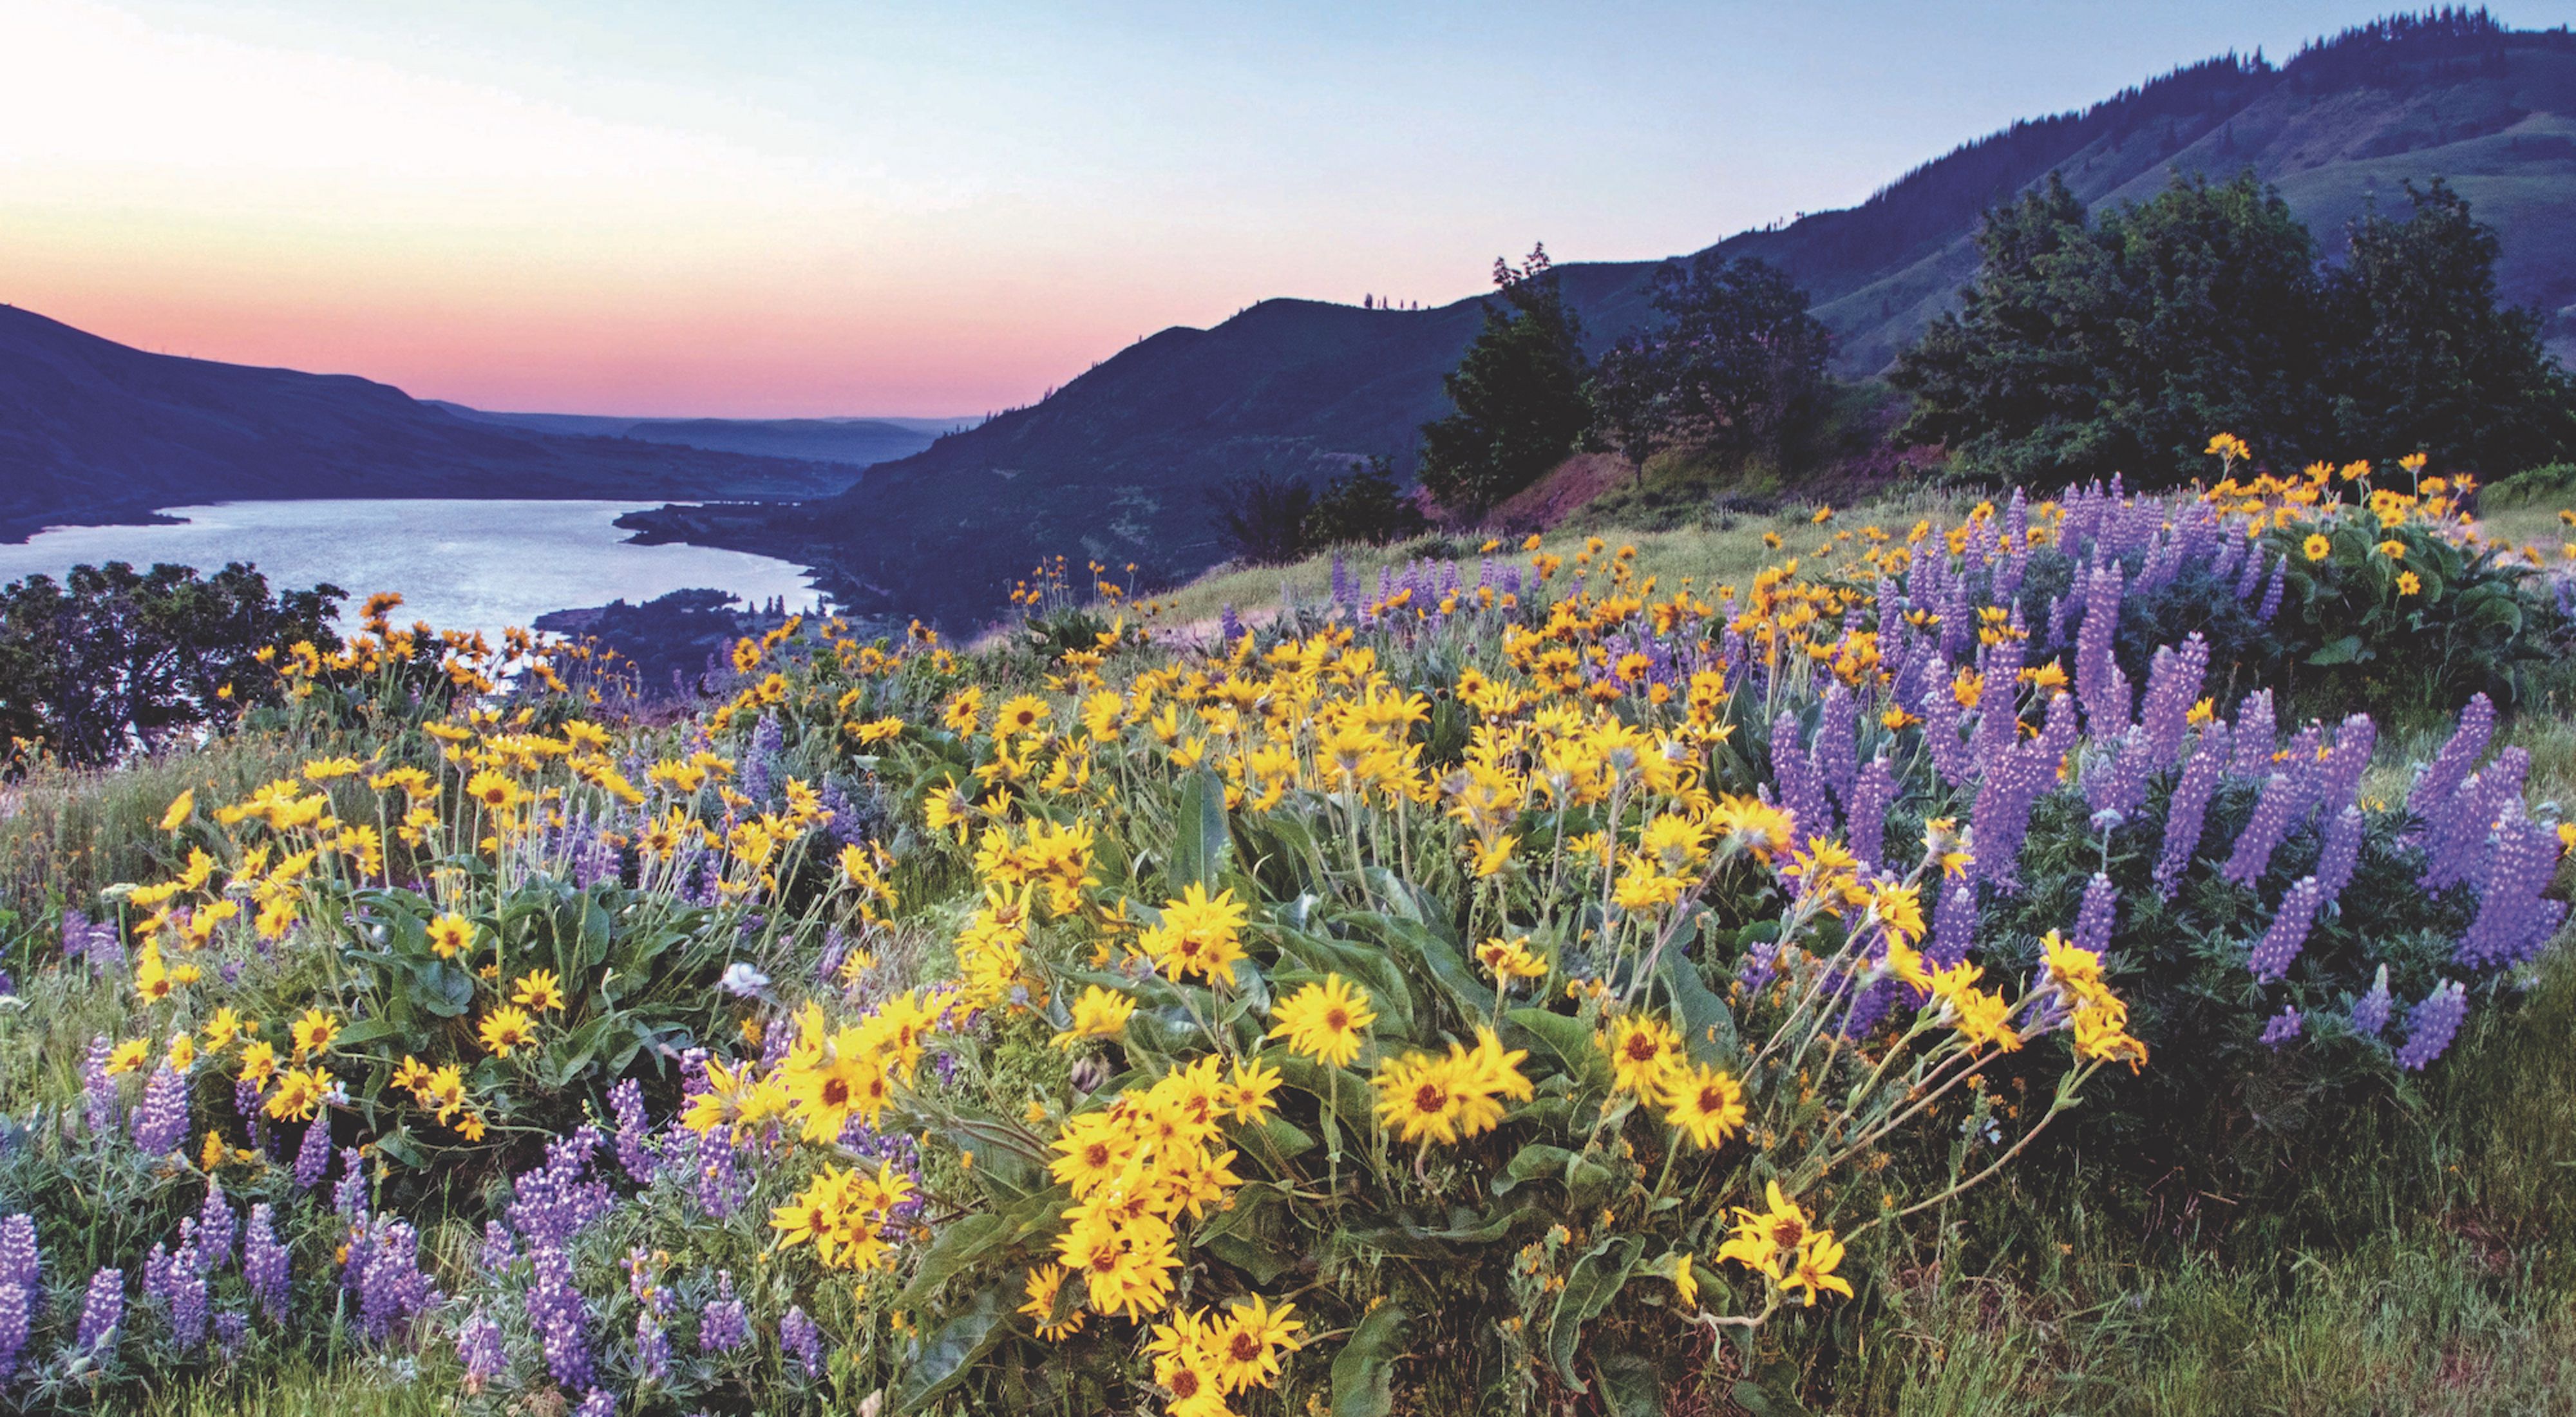  Sunrise over a field of yellow and purple flowers with forested hills in the background